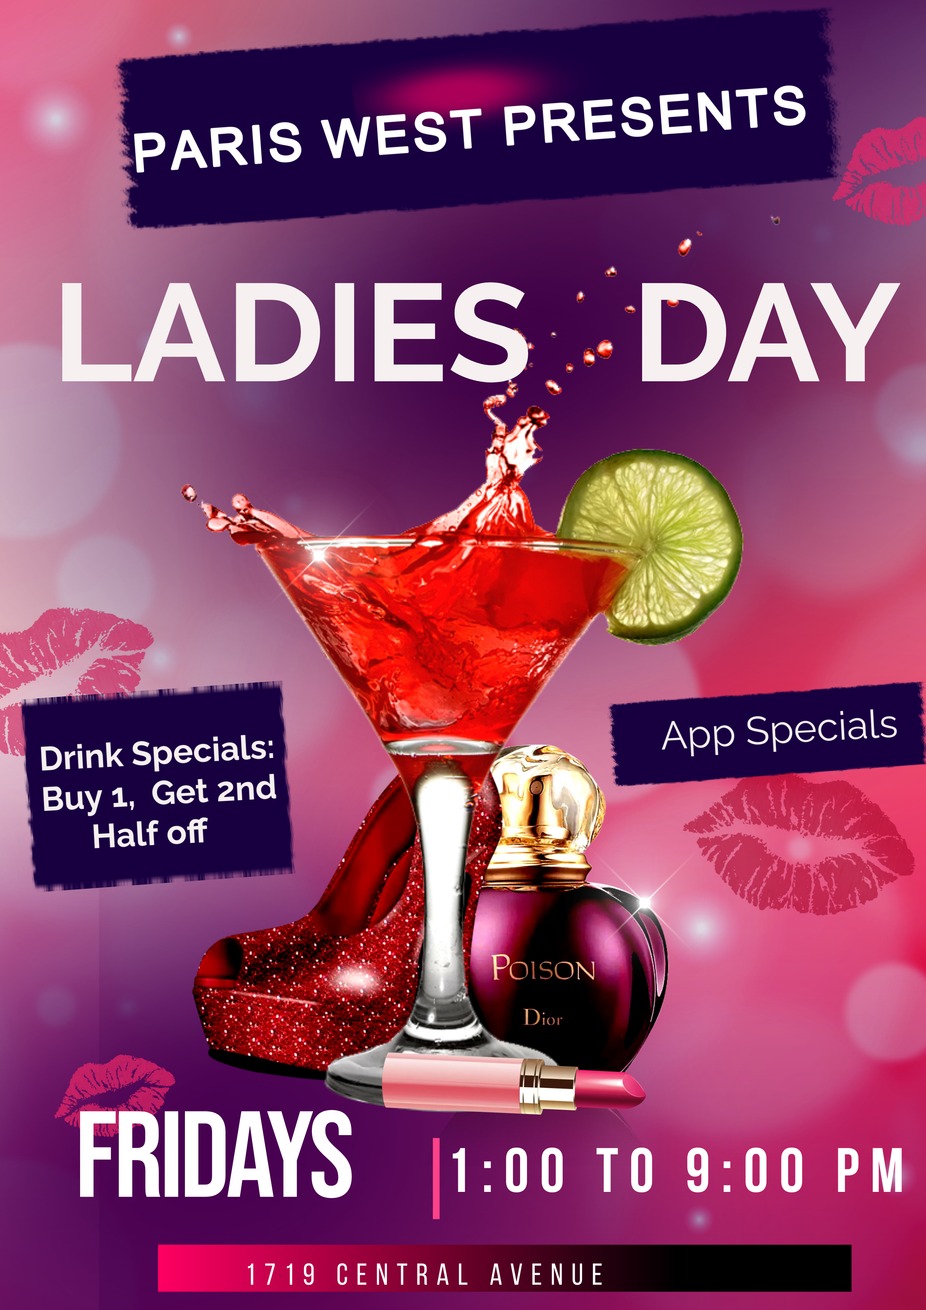 LADIES DAY!    Every Friday from 1:00 to 9:00 pm event photo